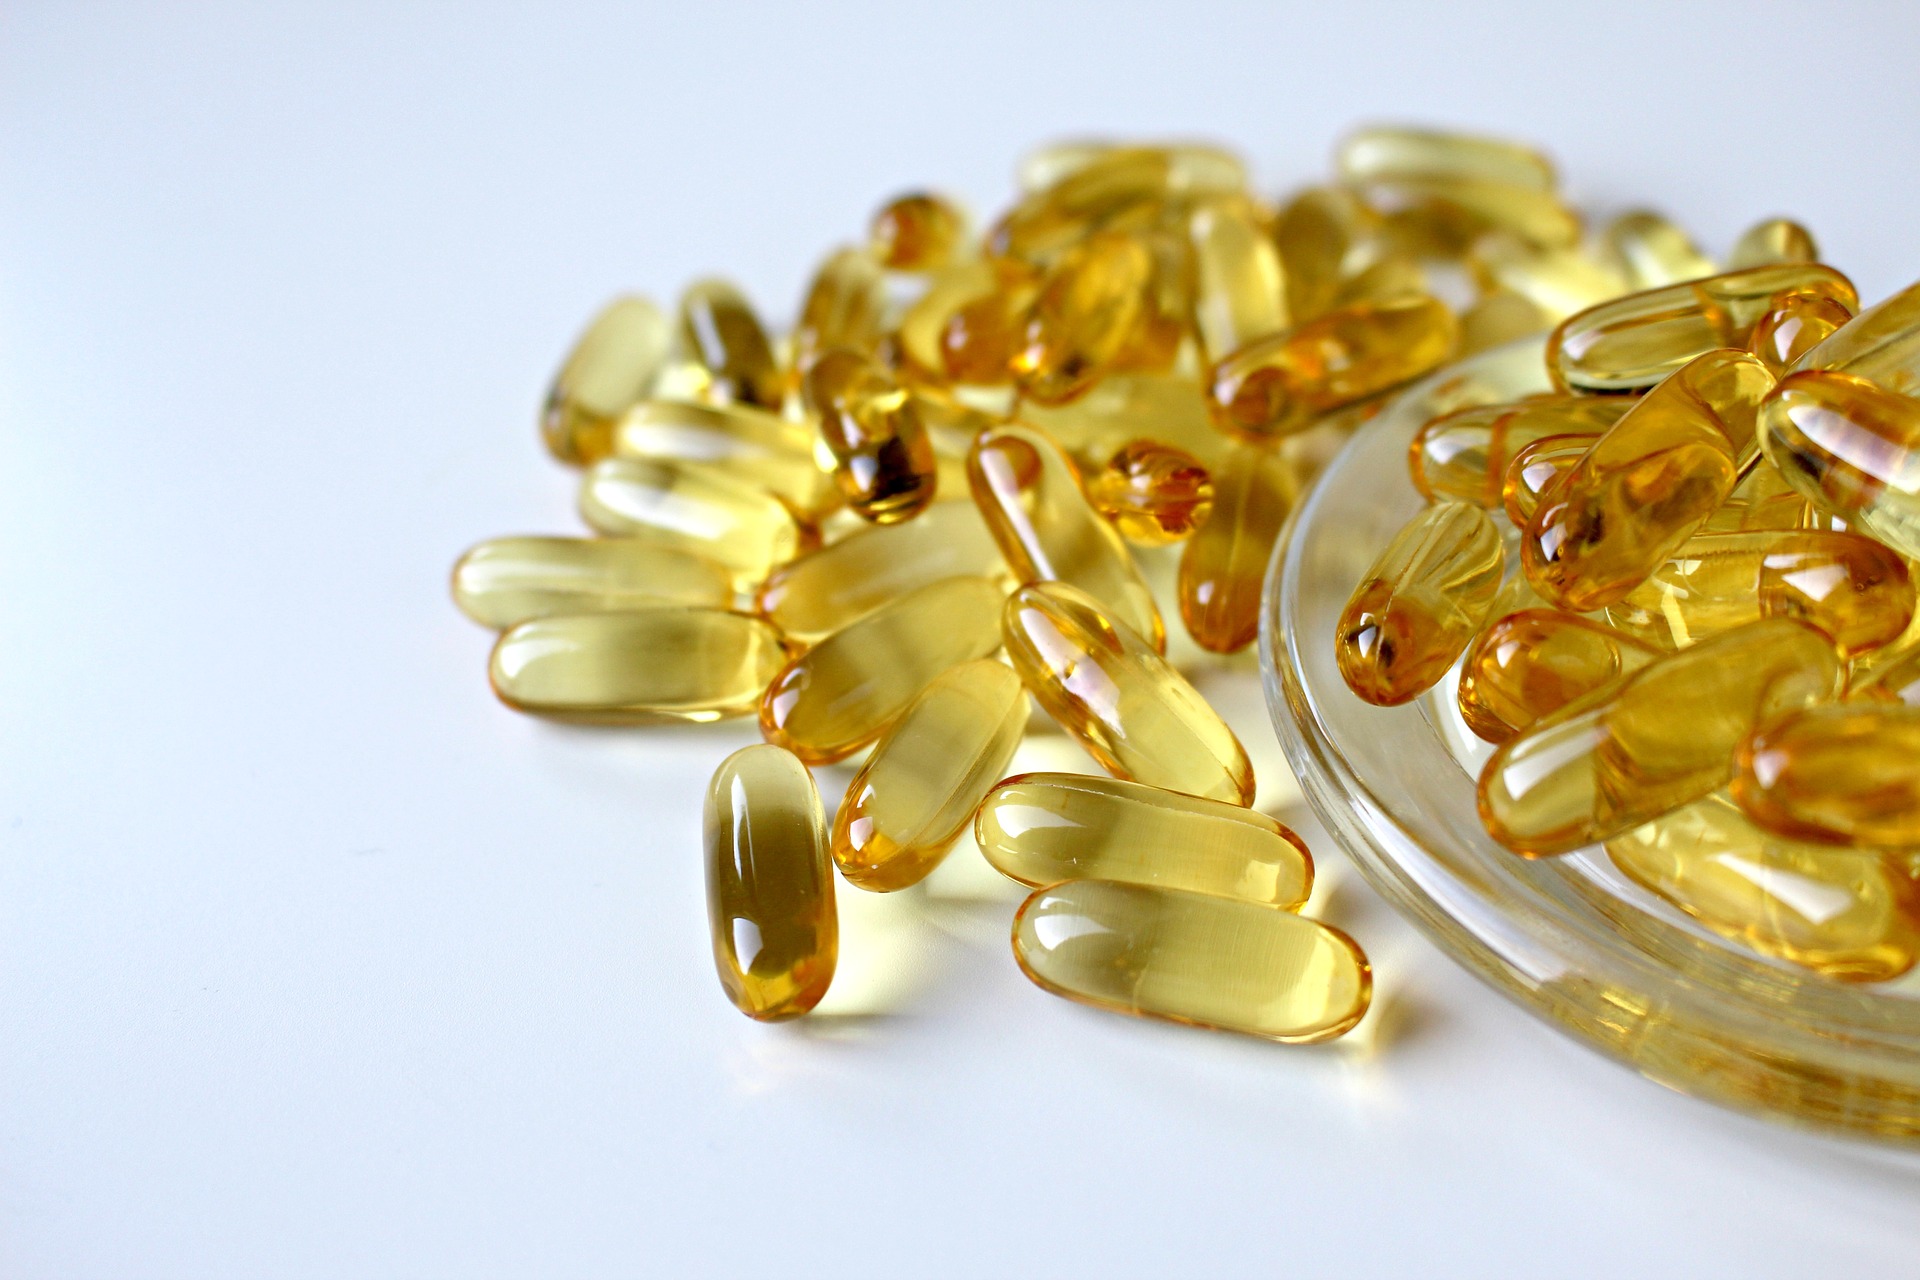 Are Fish Oil Supplements Helping or Harming Your Health? (Become a Member for Access)